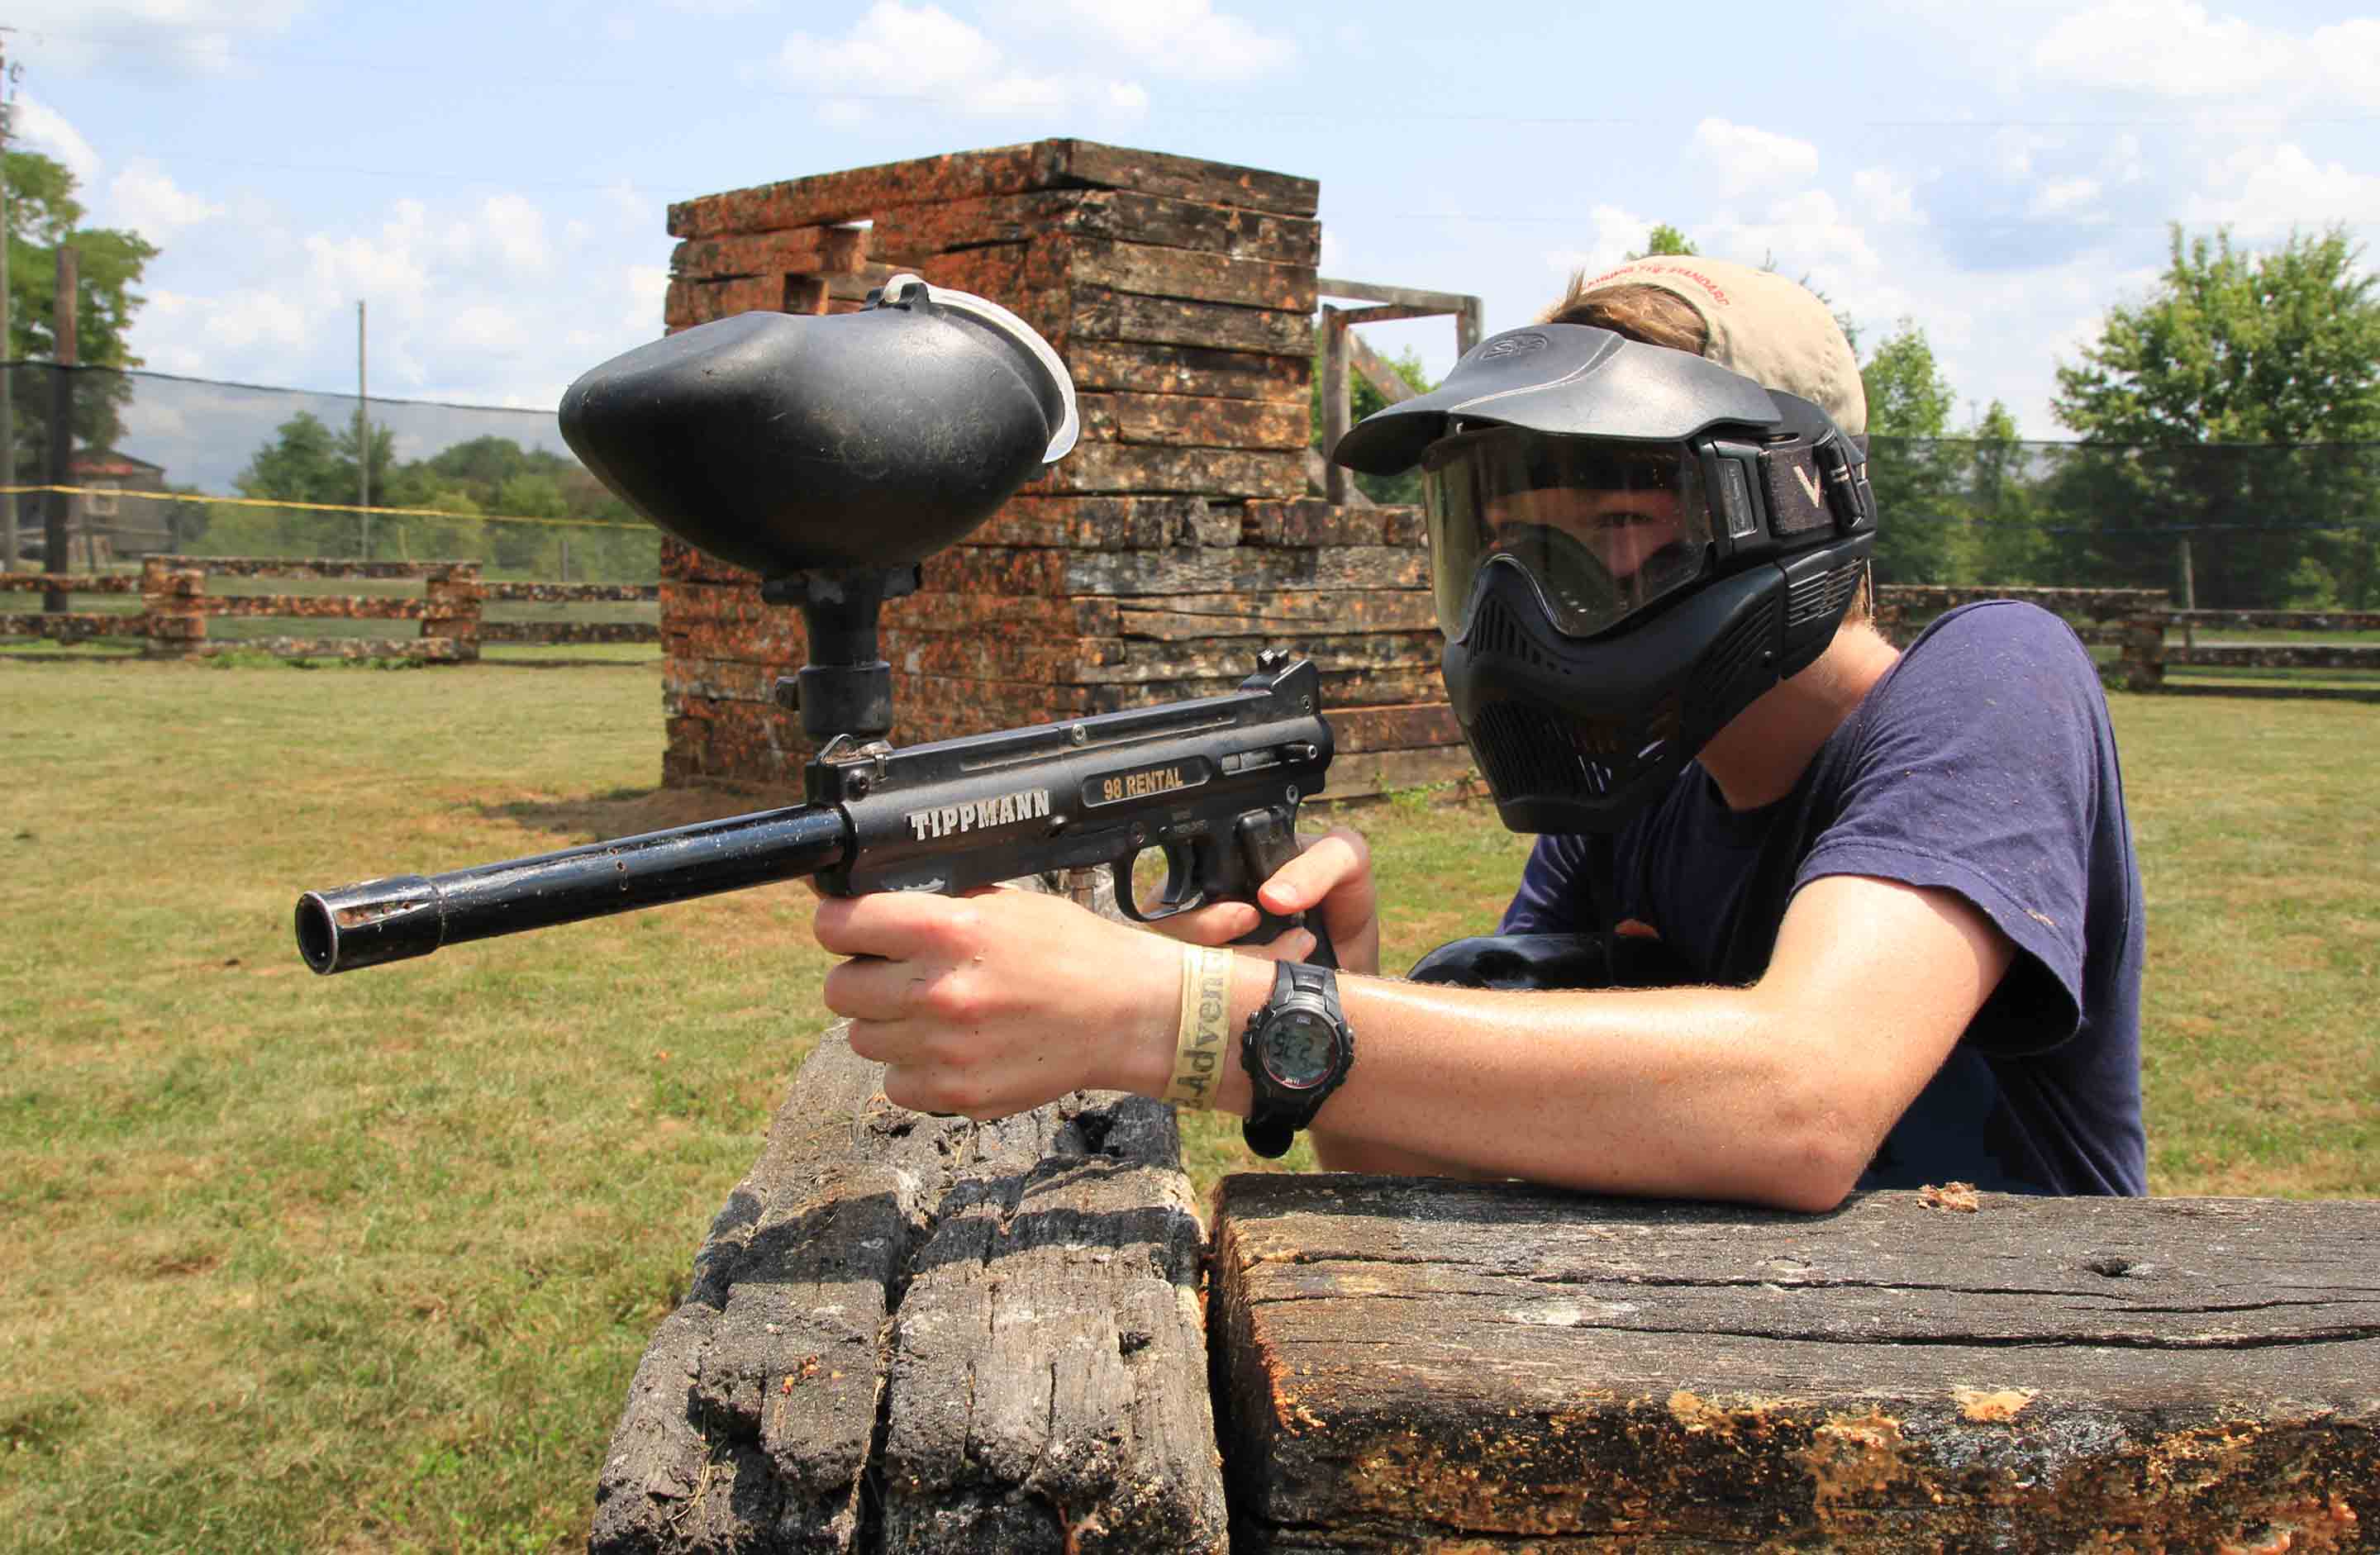 An older kid aims his paintball gun on the mountaintop course at ACE Adventure Resort.